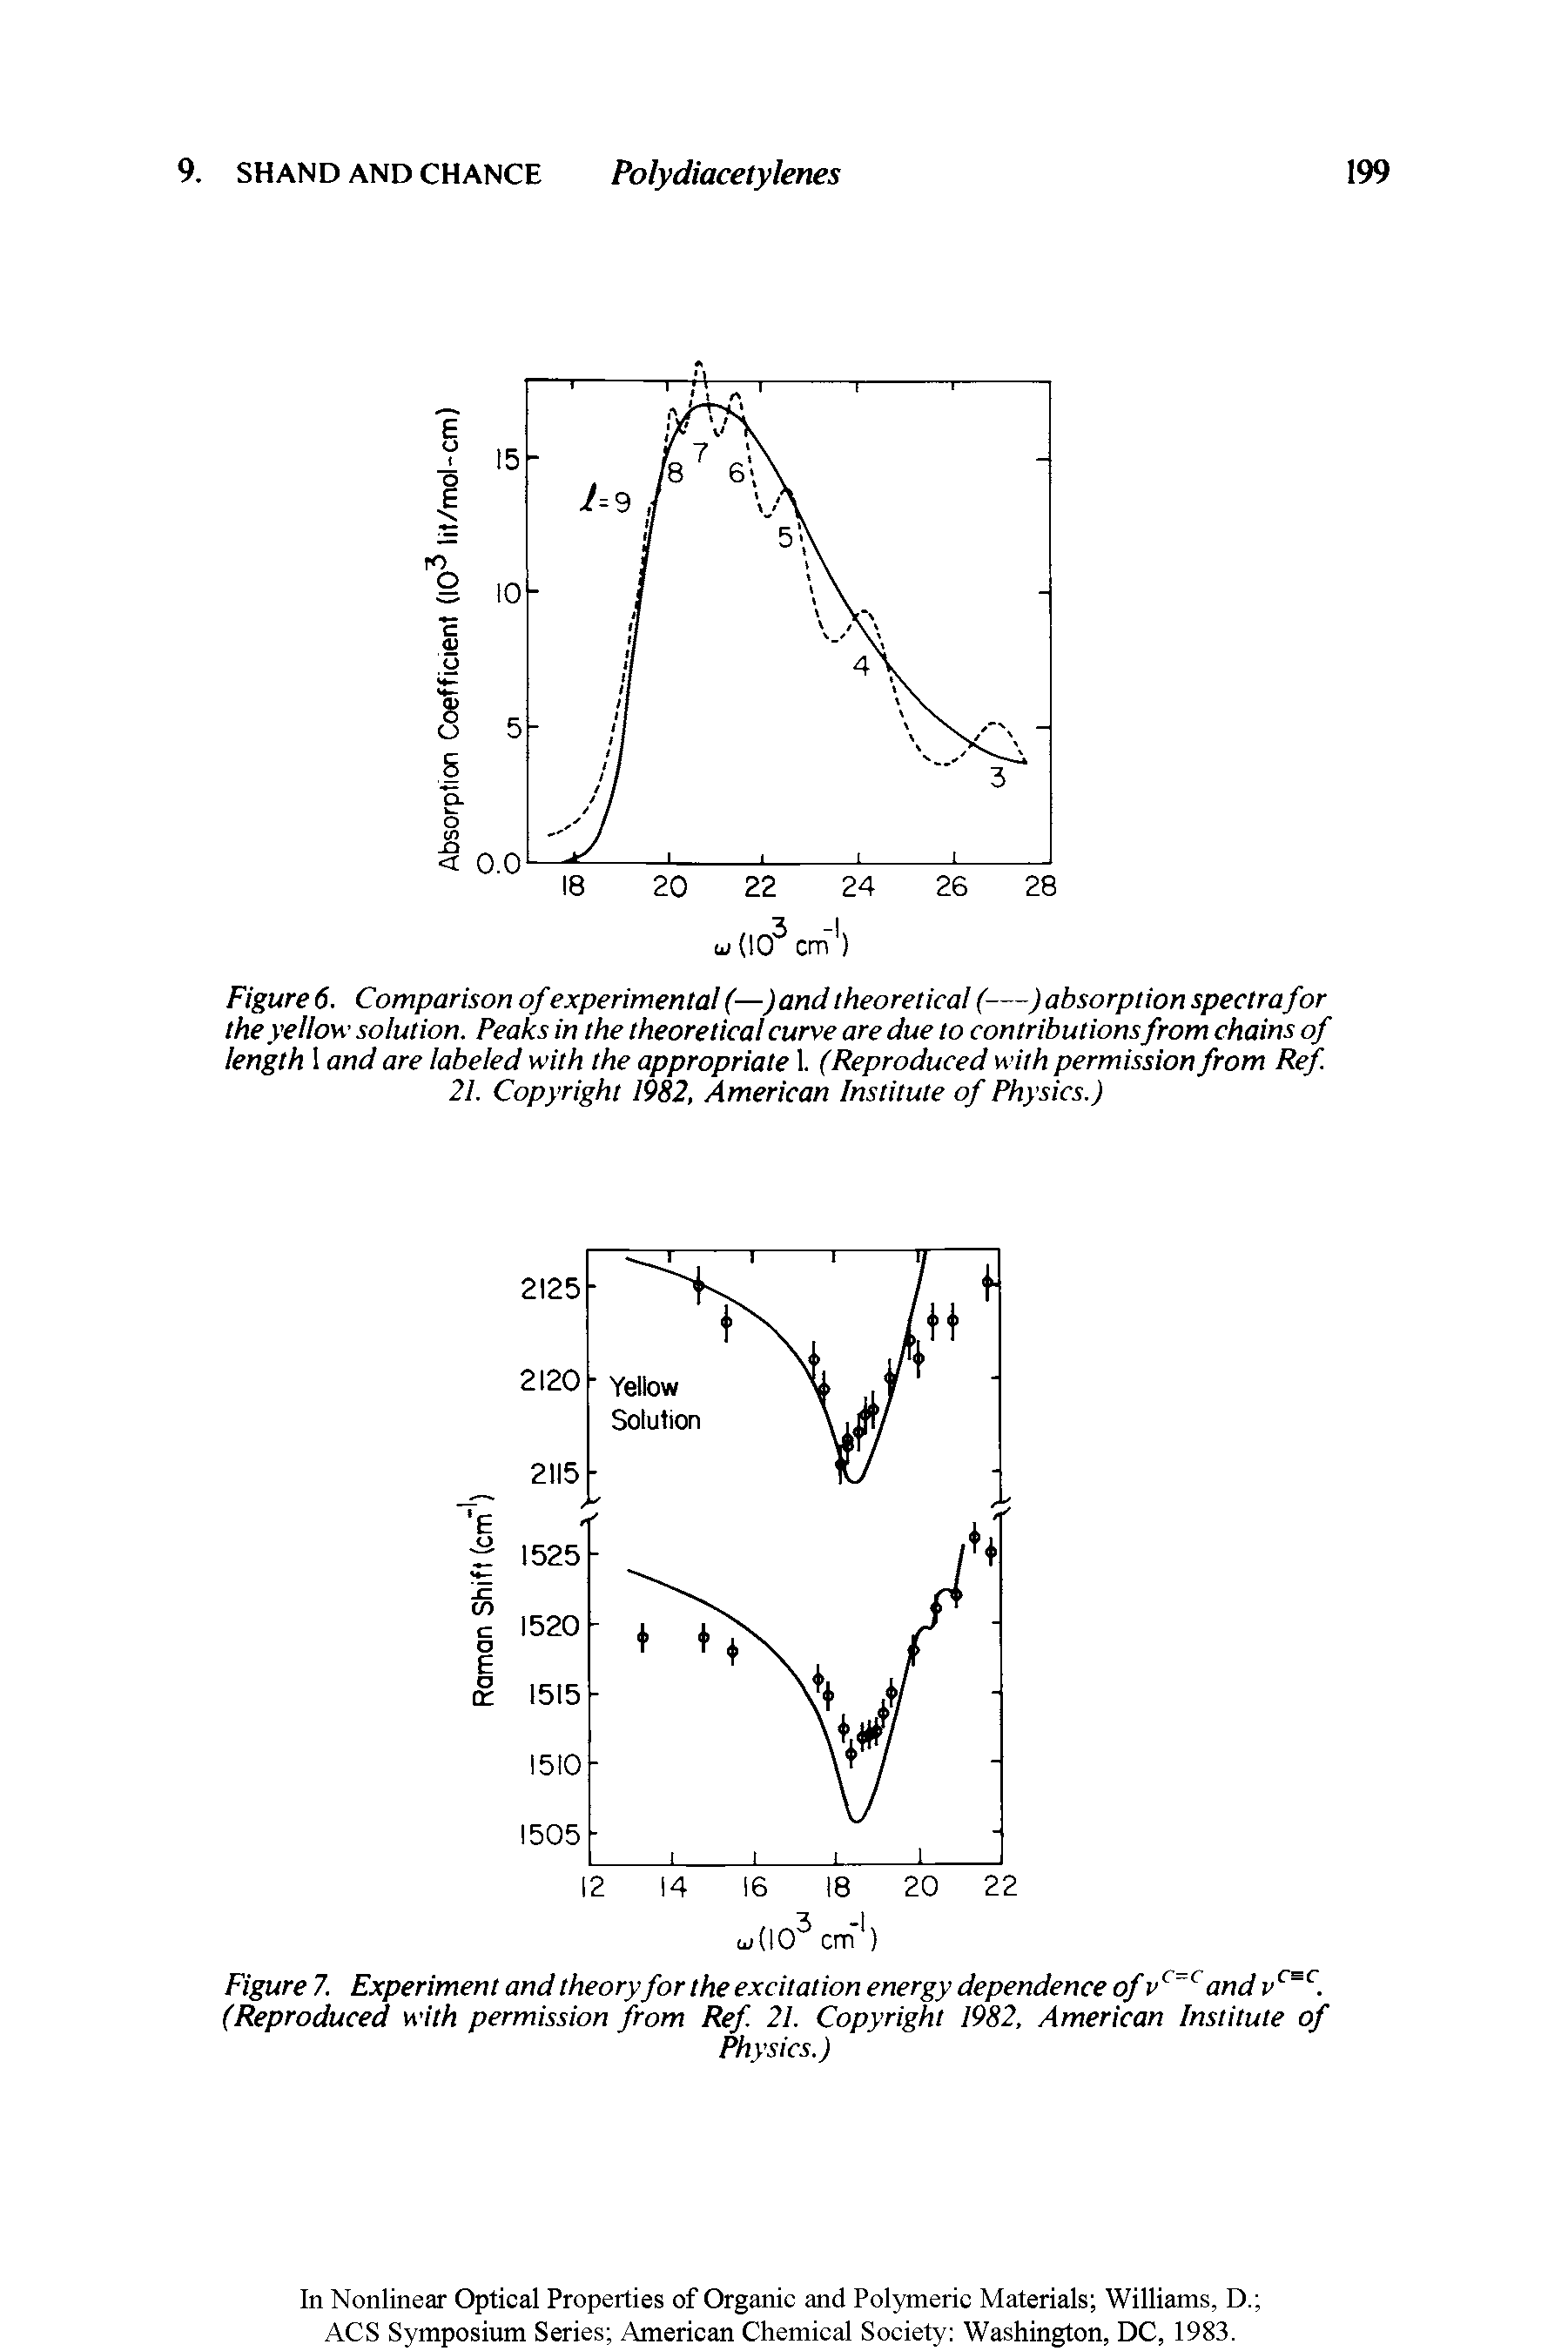 Figure 6. Comparison of experimental (—) and theoretical (—) absorption spectra for the yellow solution. Peaks in the theoretical curve are due to contributionsfromchains of length I and are labeled with the appropriate 1. (Reproduced with permission from Ref. 21. Copyright 1982, American Institute of Physics.)...